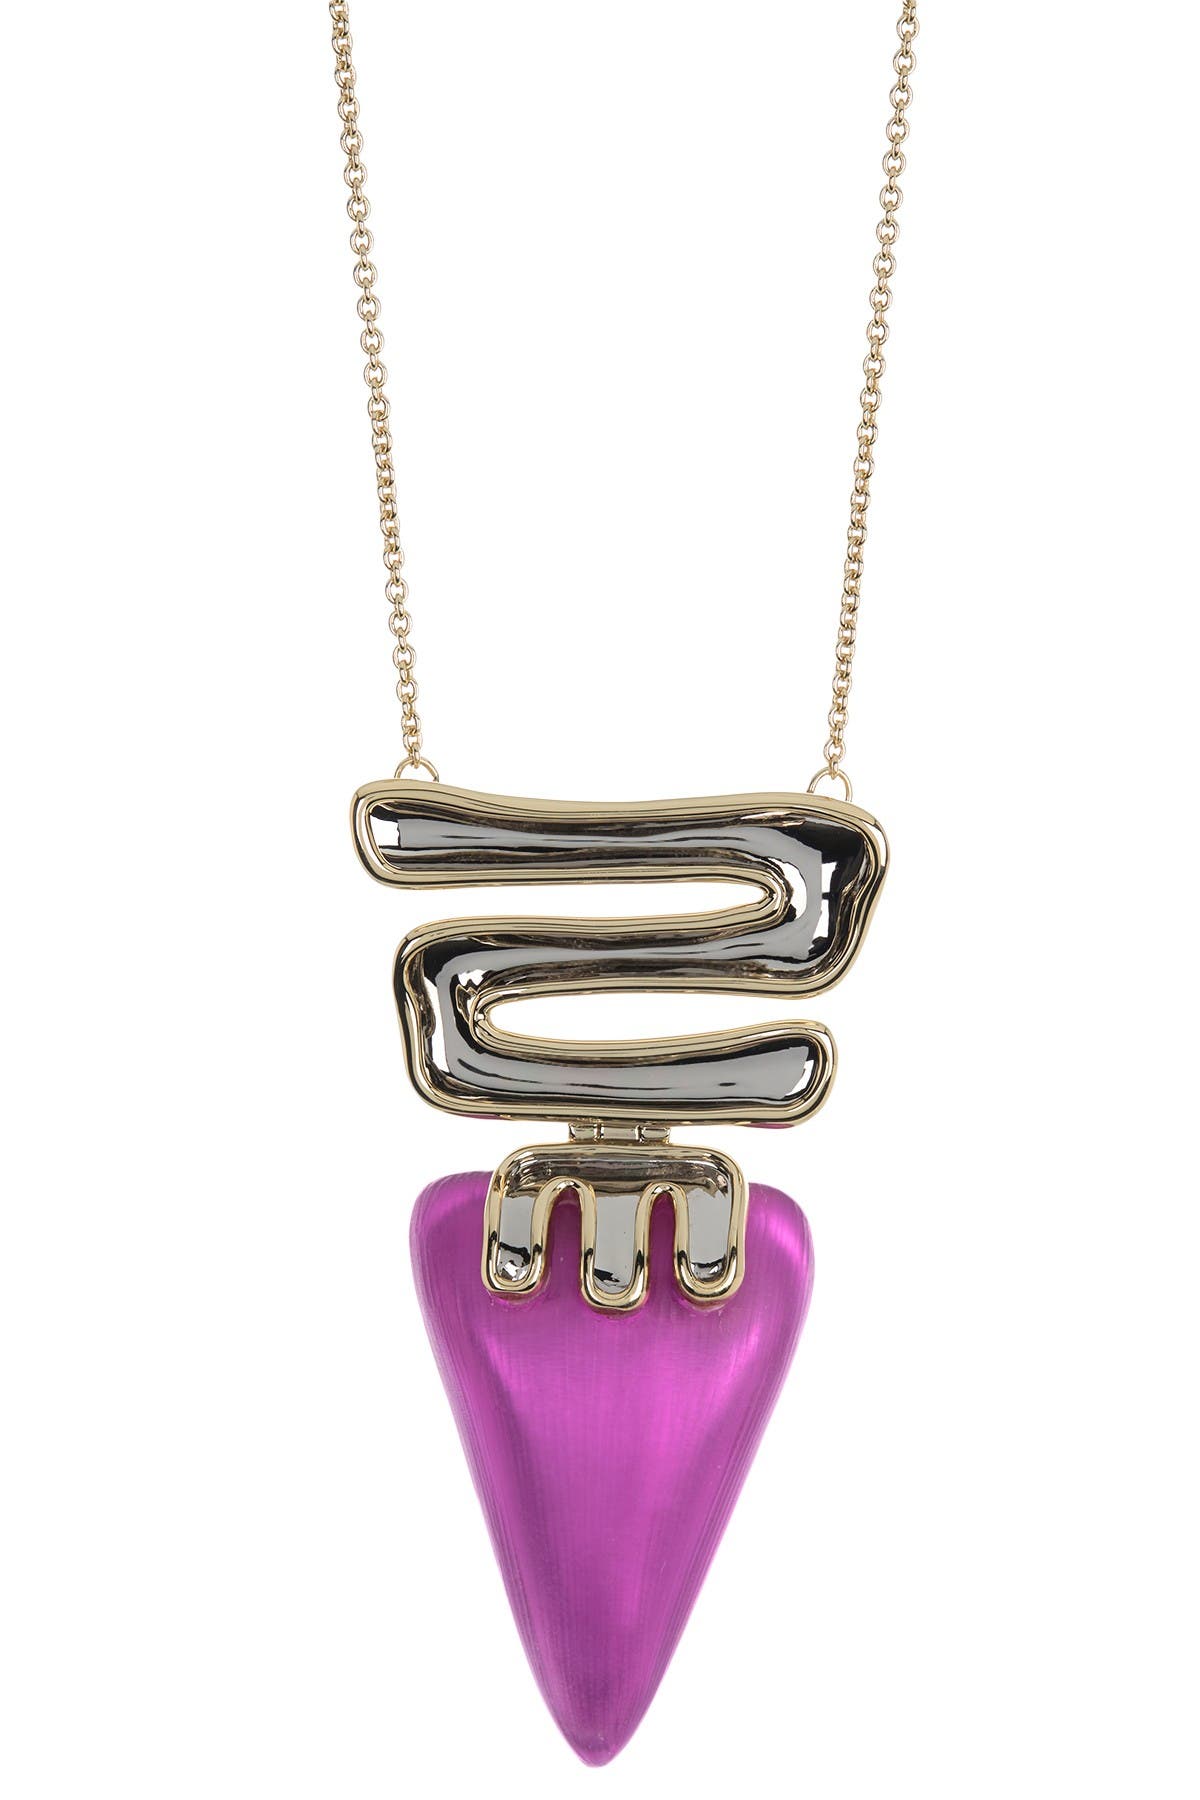 Alexis Bittar Two-tone Sculptural Hinged Pendant Necklace In Fuchsia